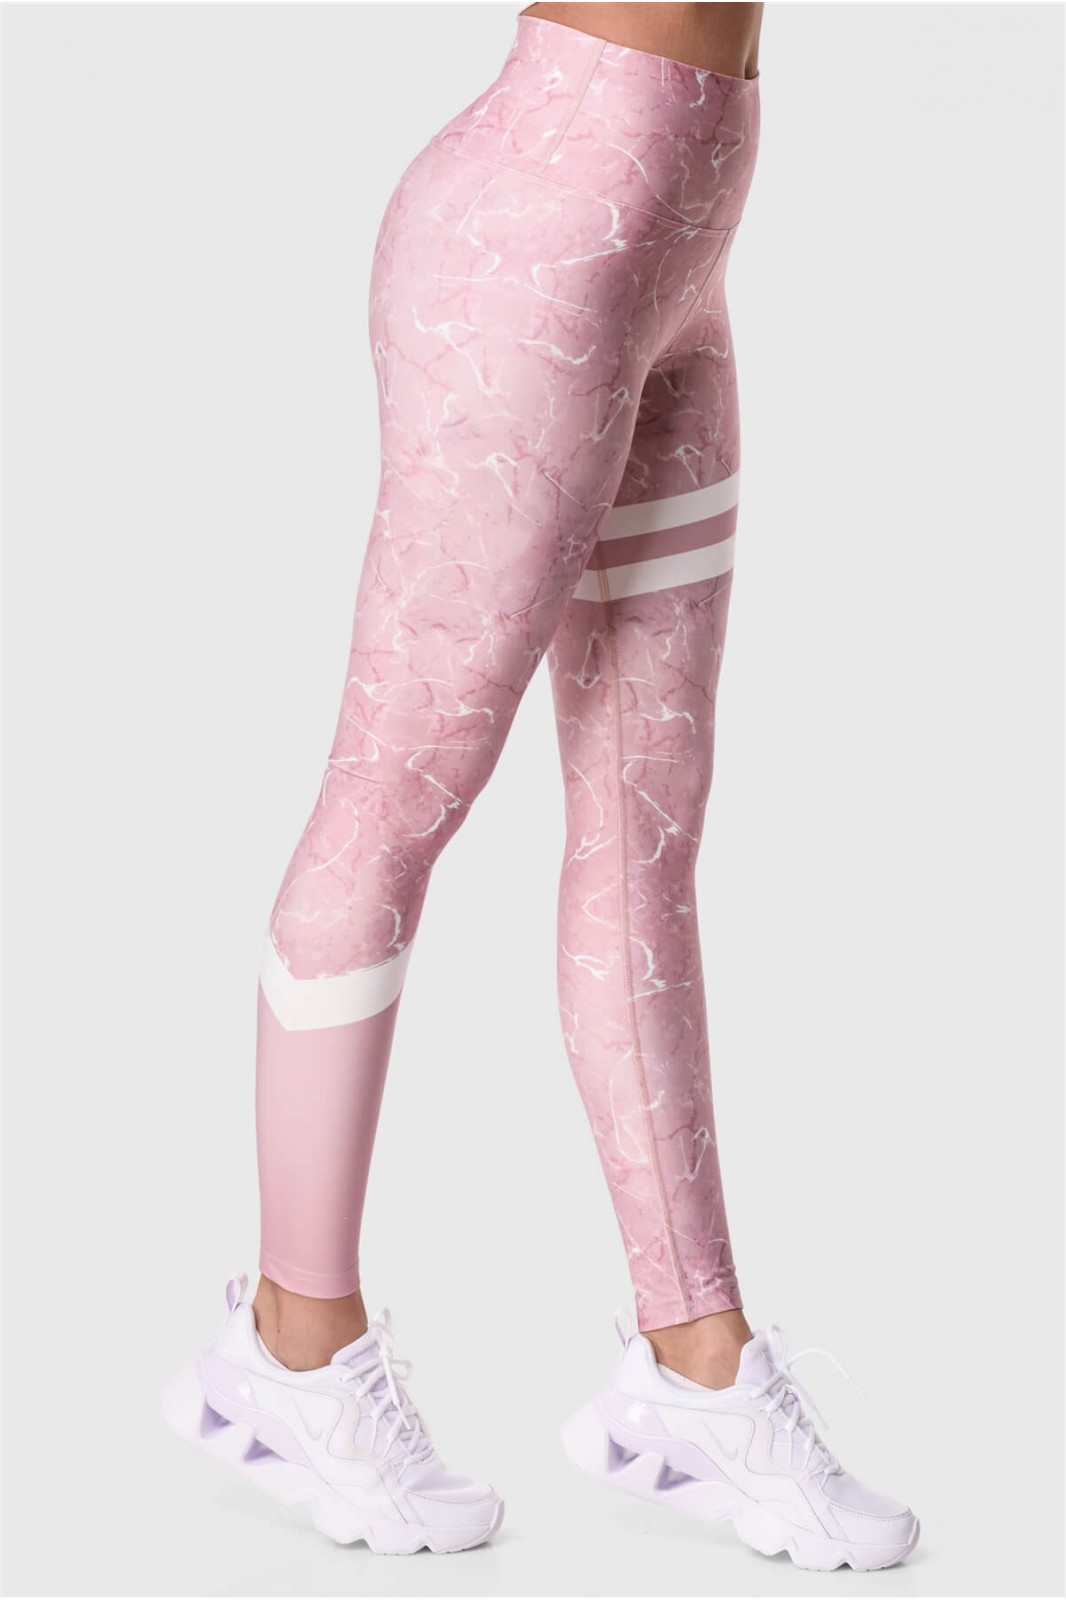 Sports leggings Superstacy Pink Marble PUSH UP